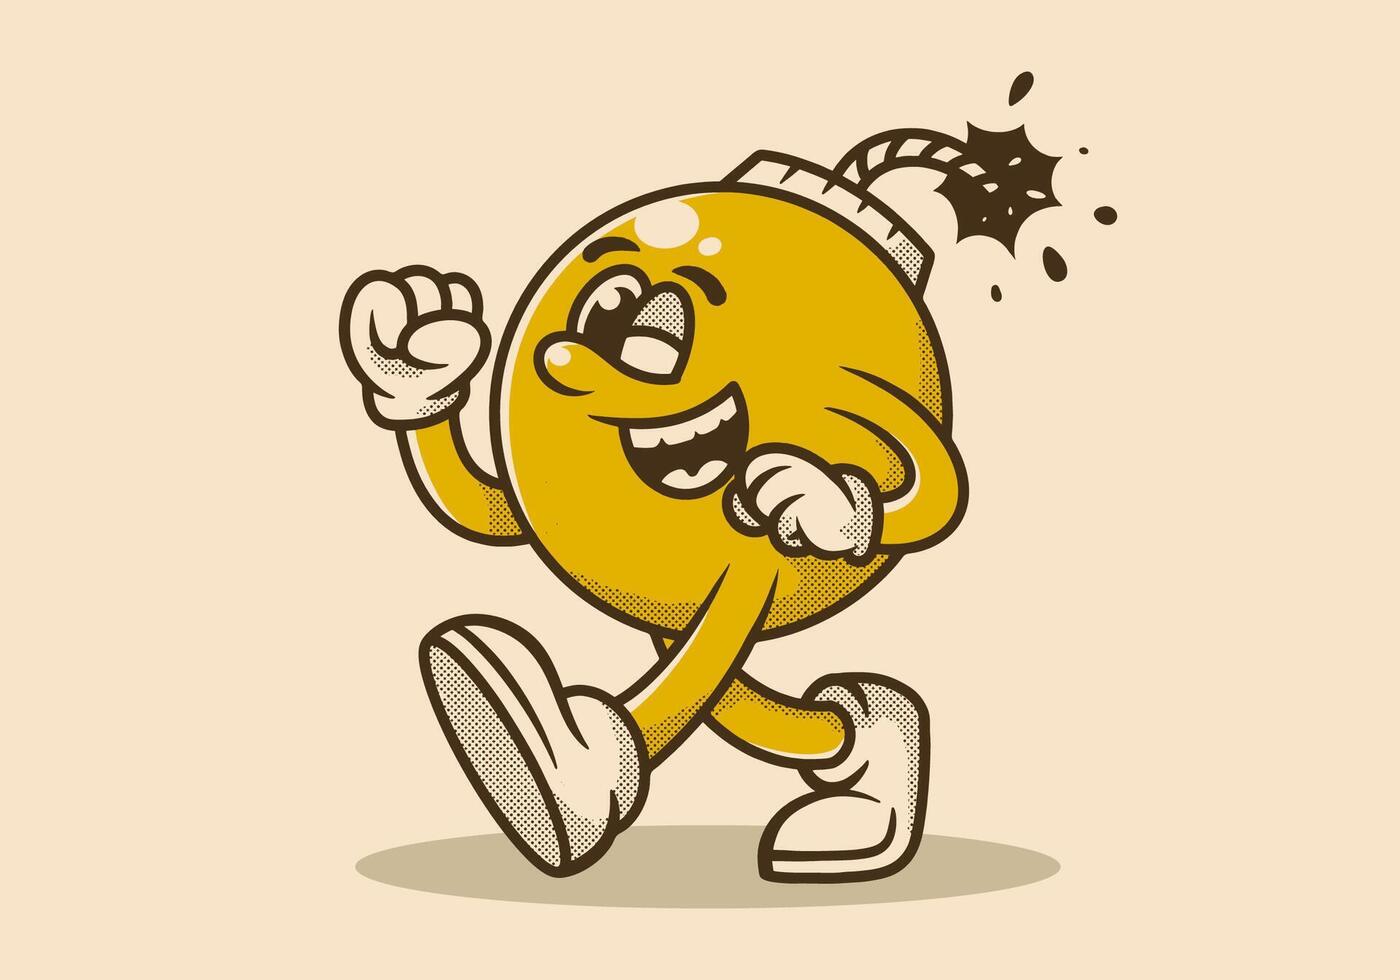 Vintage illustration of walking bomb mascot character with happy face vector